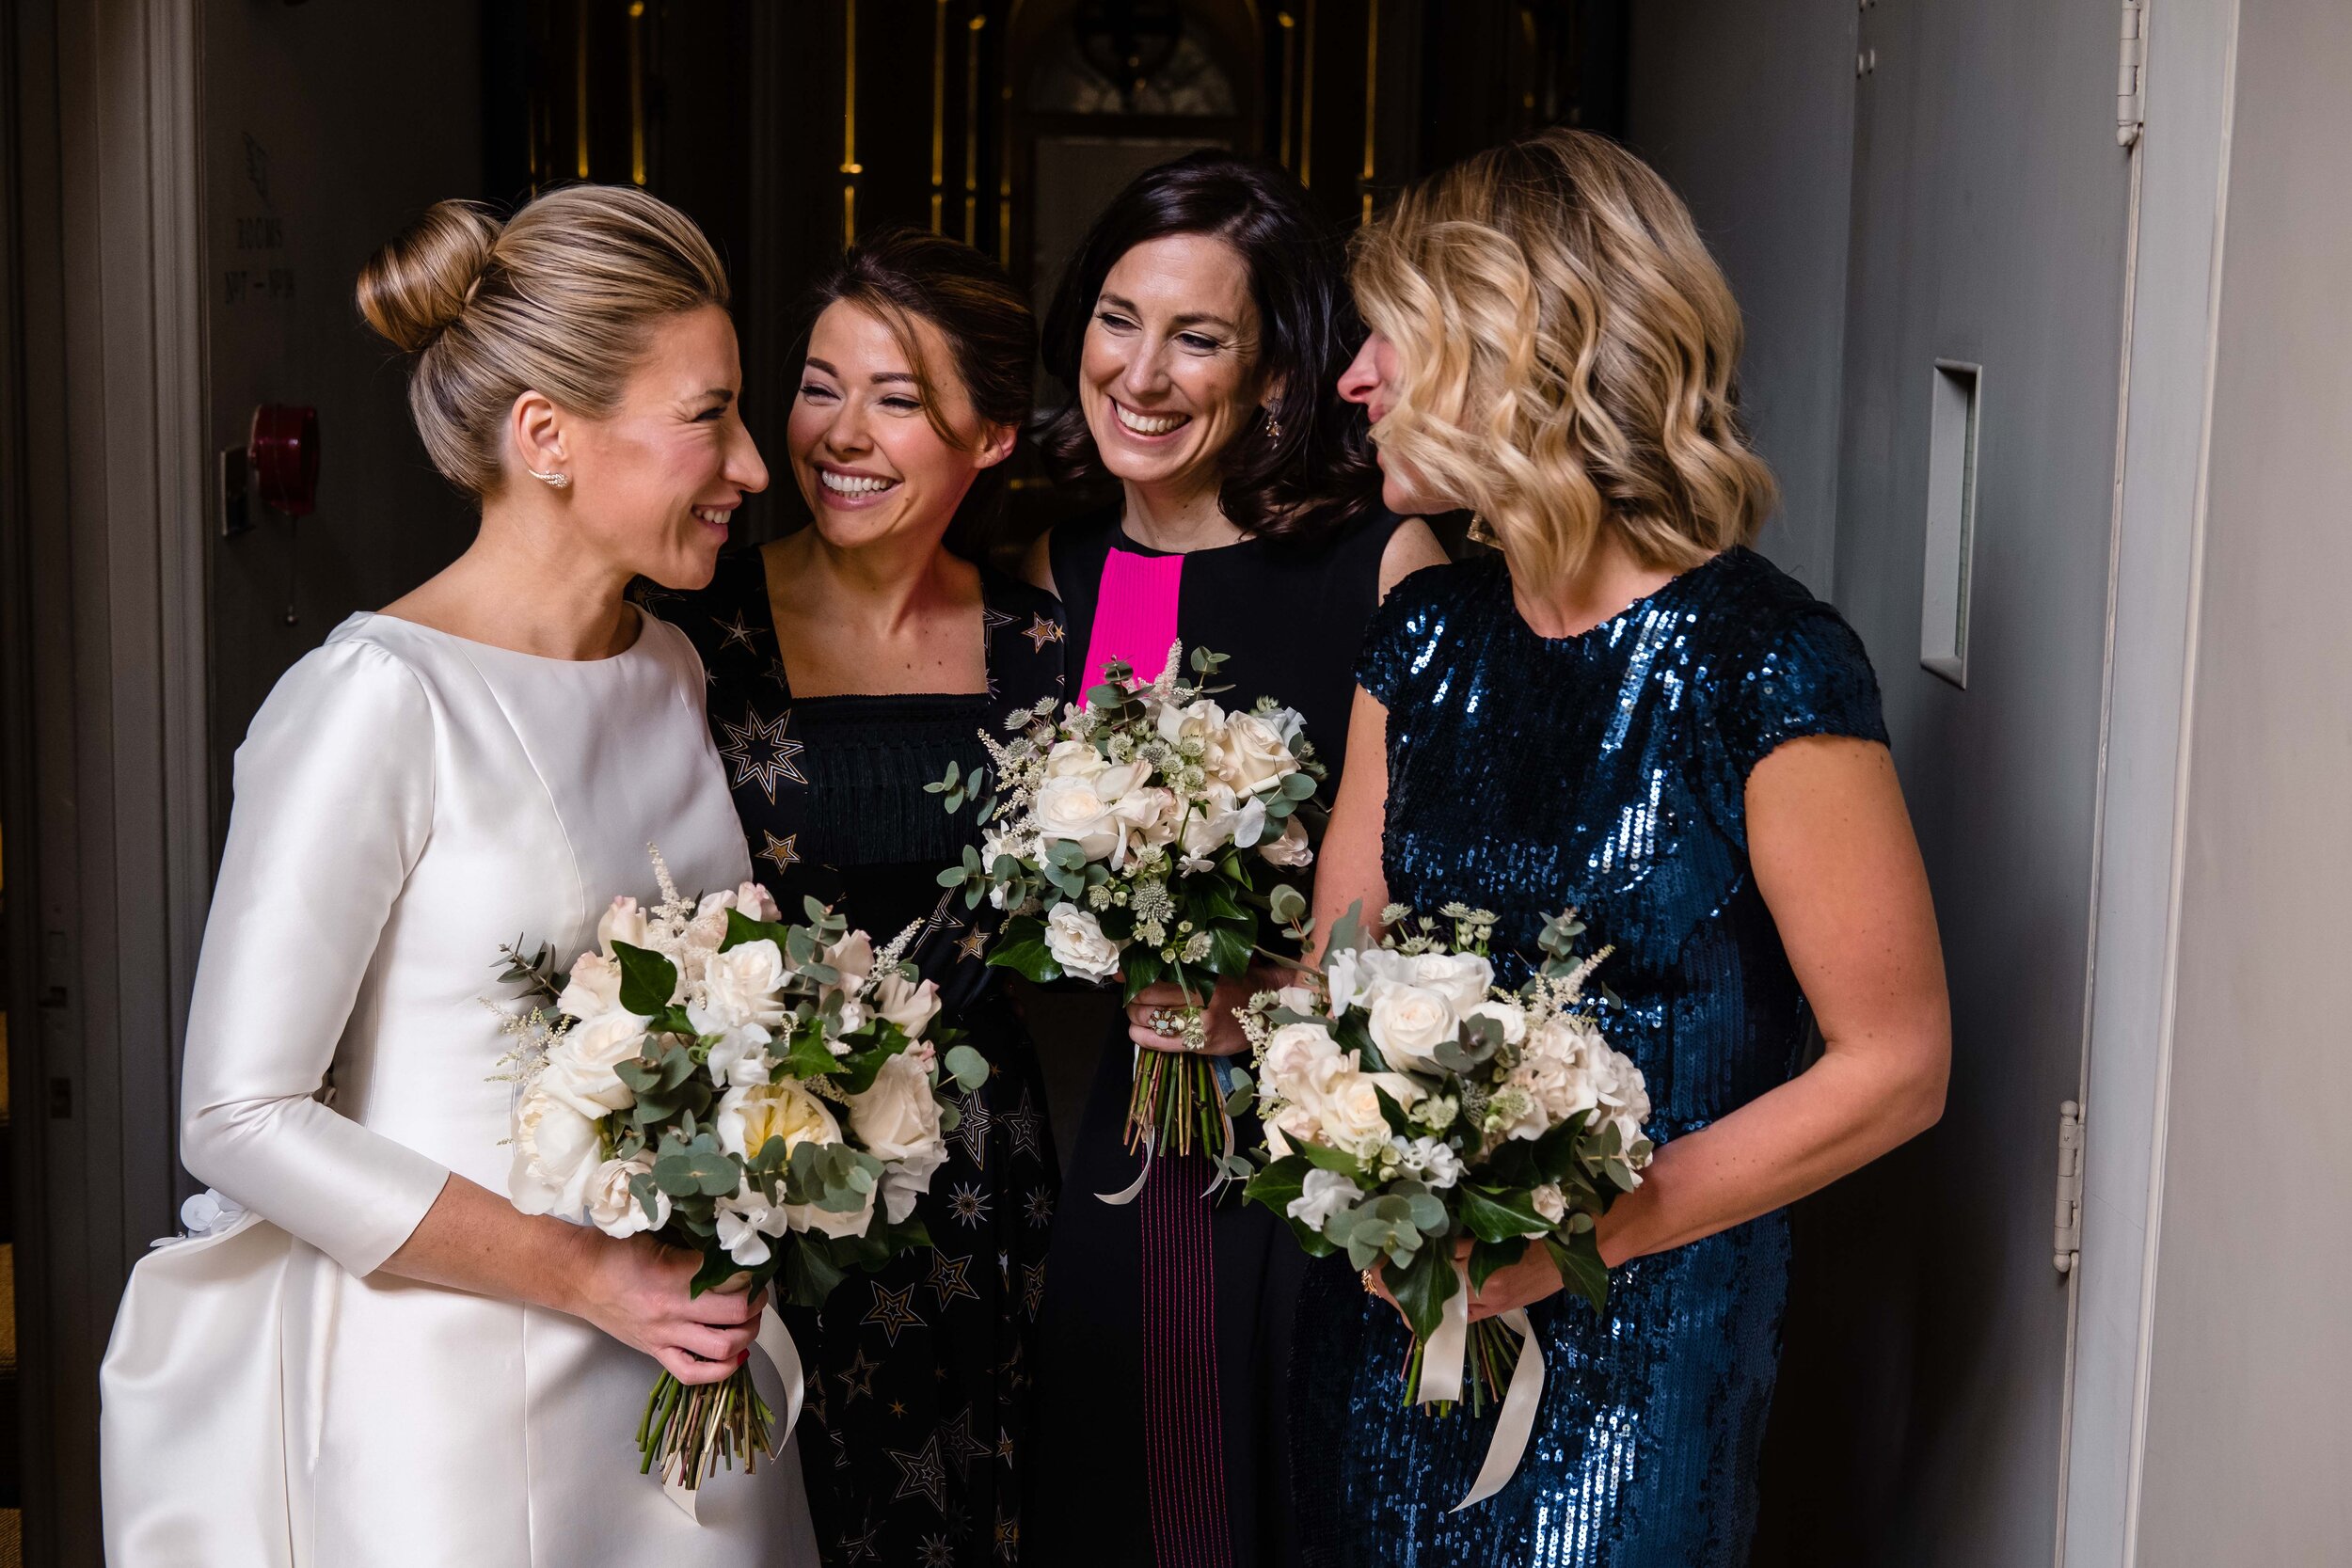 bride and bridesmaids stood with floral bouquets laughing together